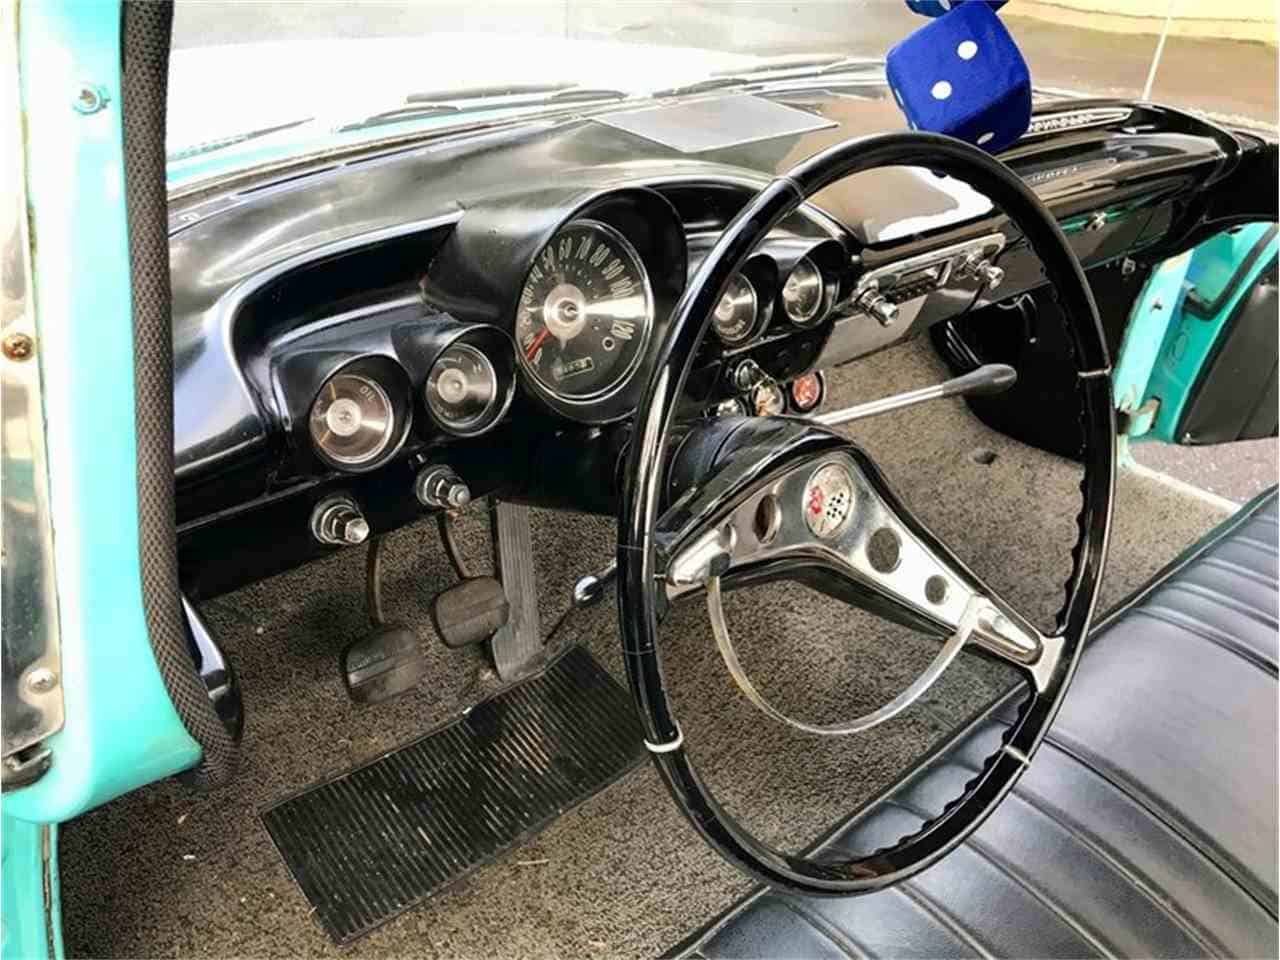 1960 Chevy El Camino in Tasco Turquoise | ClassicCars.com Journal